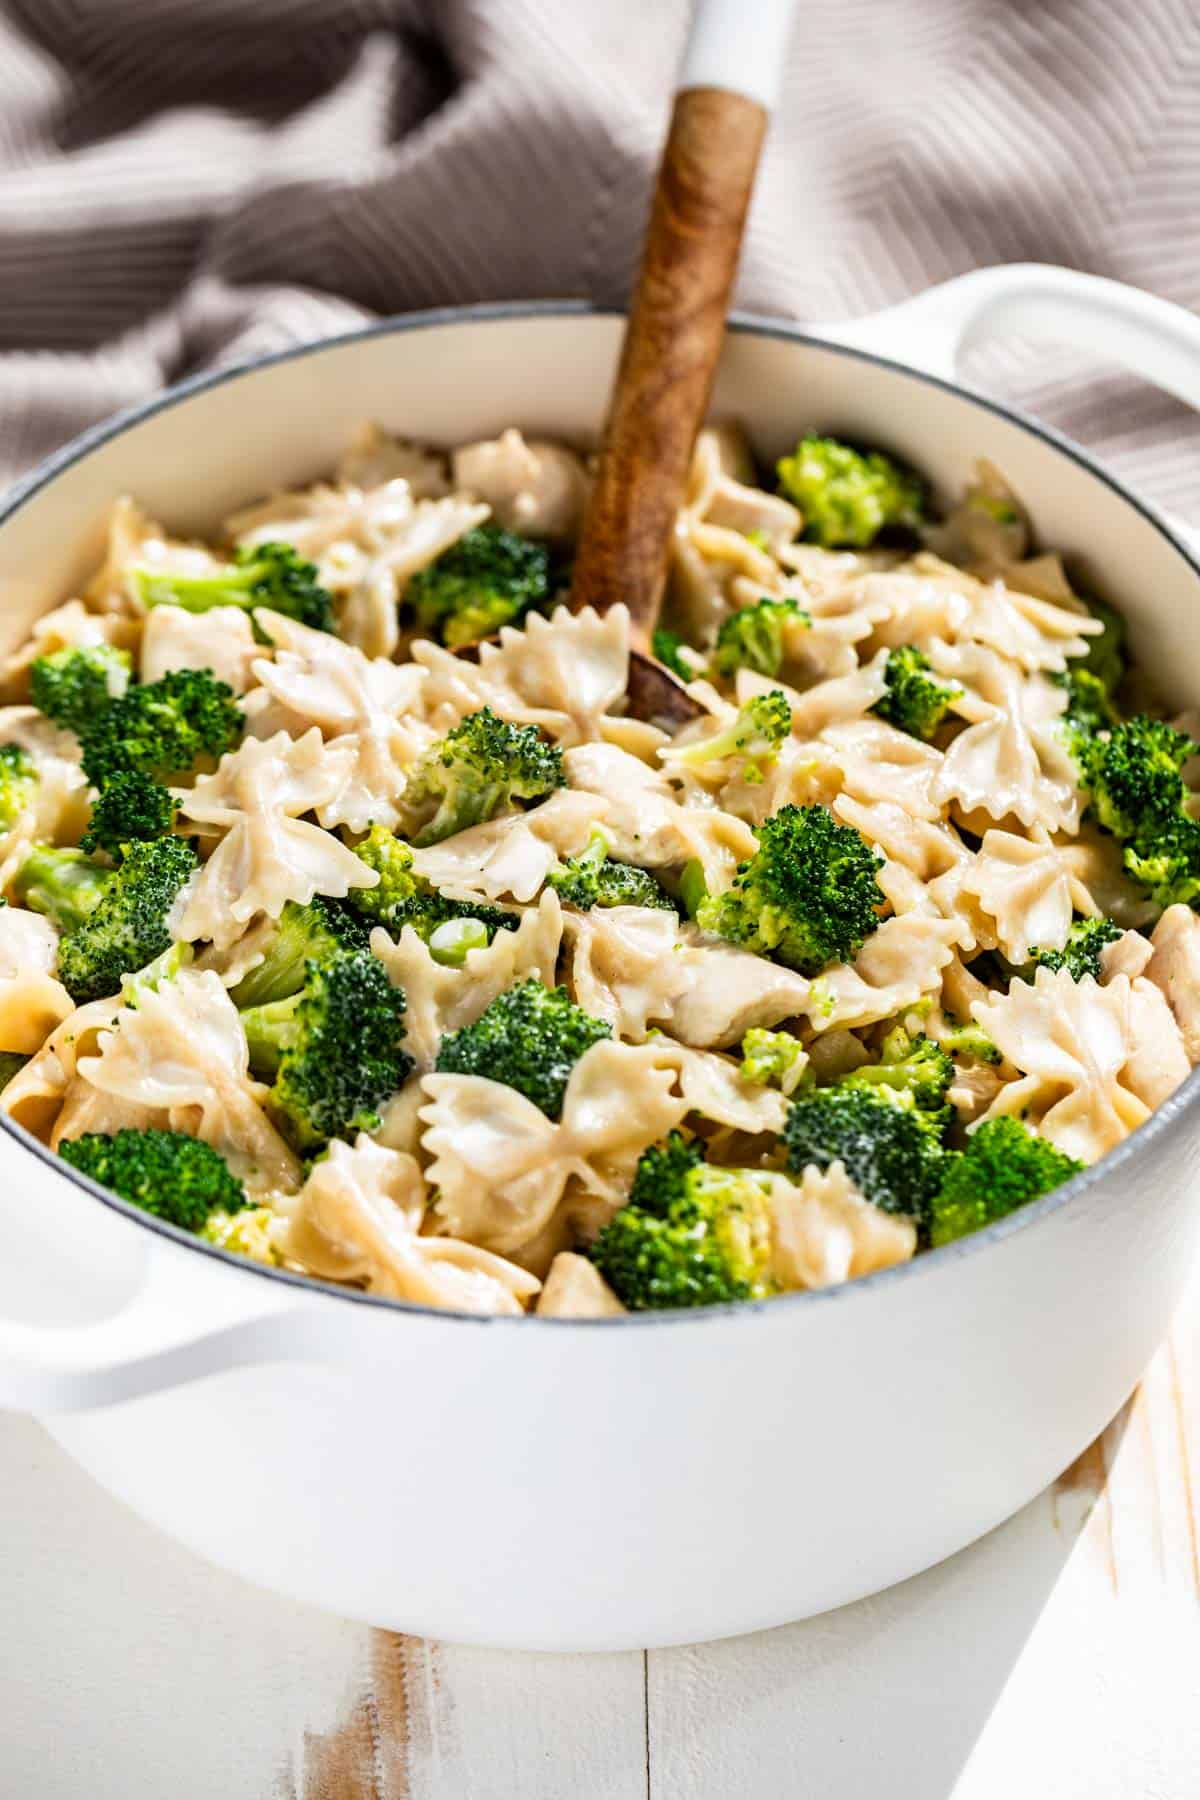 Chicken Broccoli Alfredo in a large white pot with a wood spoon in it and a brown and white striped linen in the background.